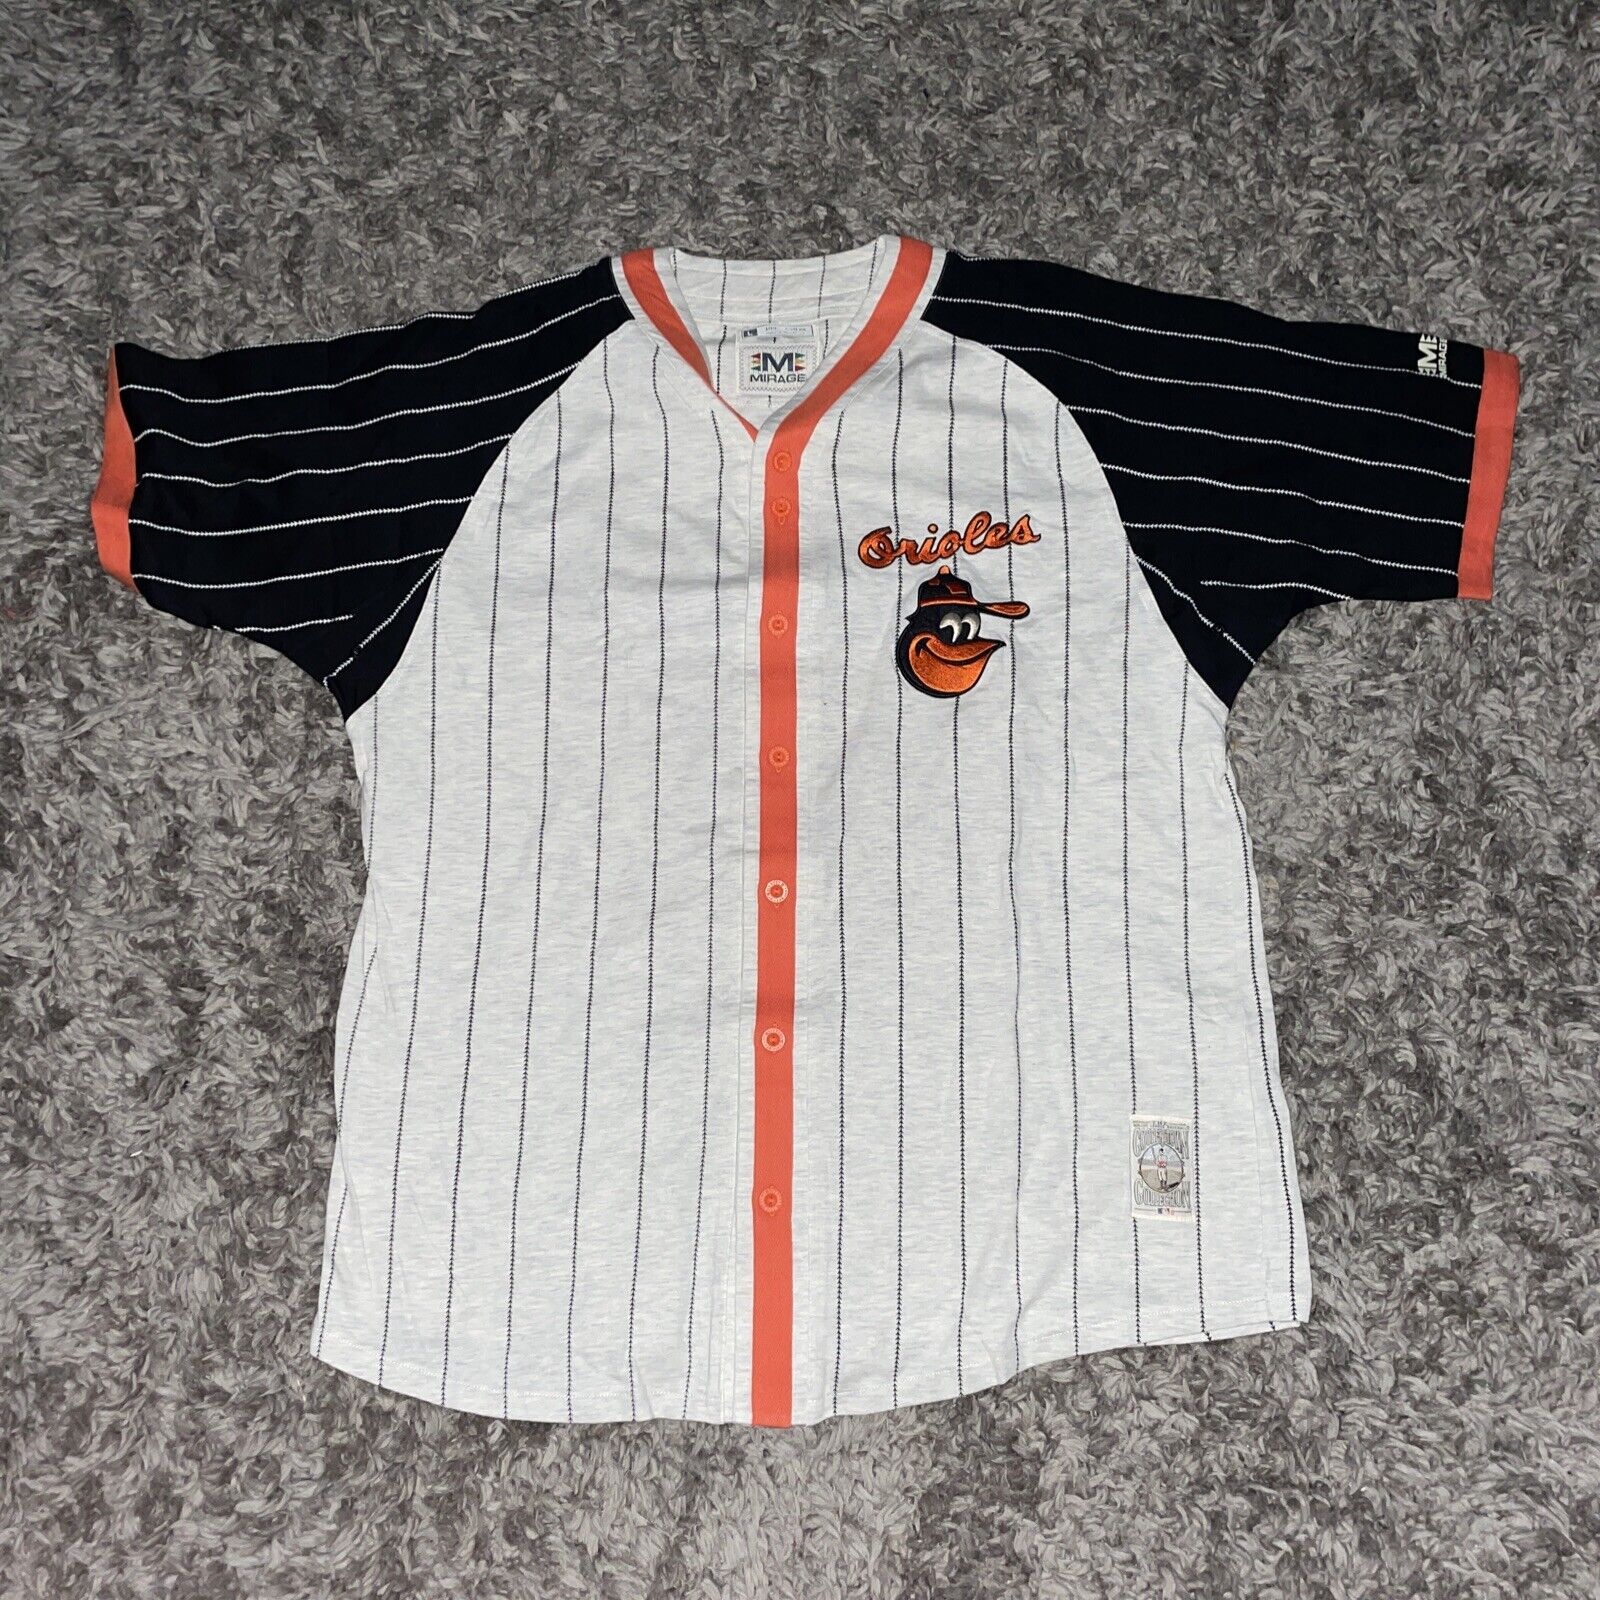 Consignment of the Week: Flannel Brooks Robinson Jersey from 1971